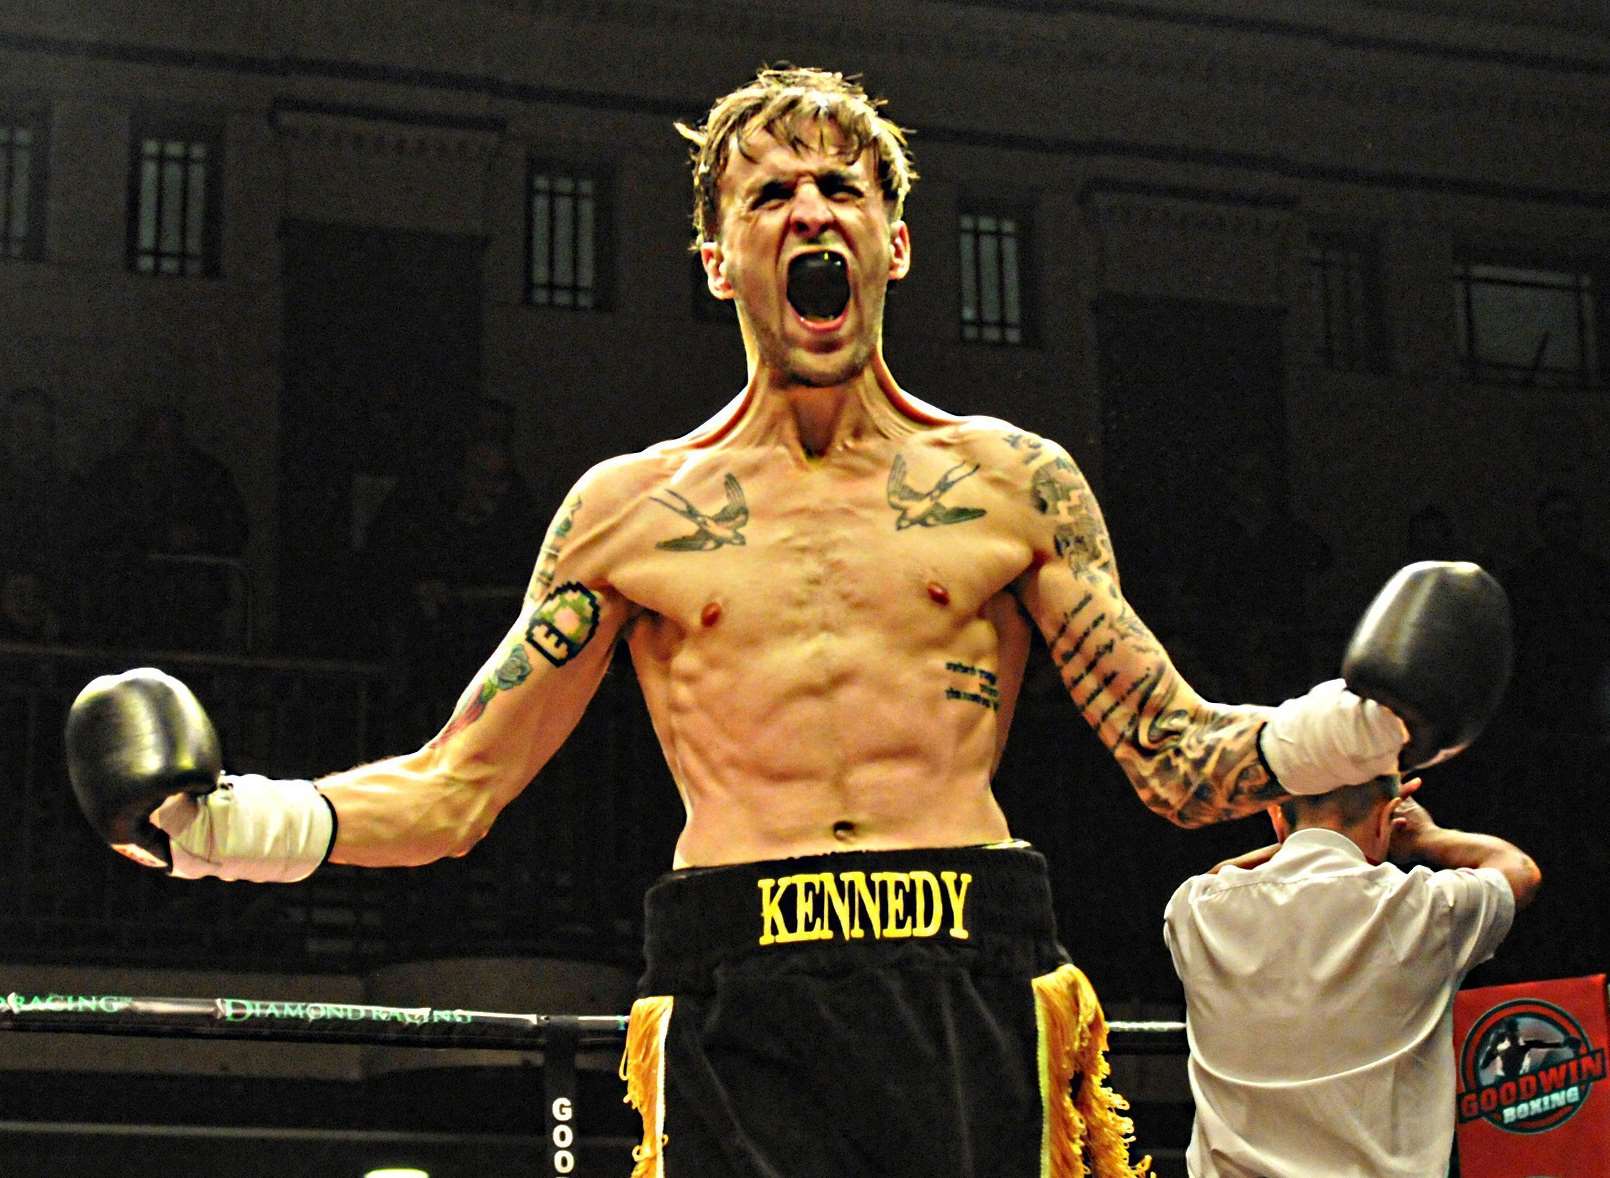 Folkestone boxer Josh Kennedy has won his first four professional fights